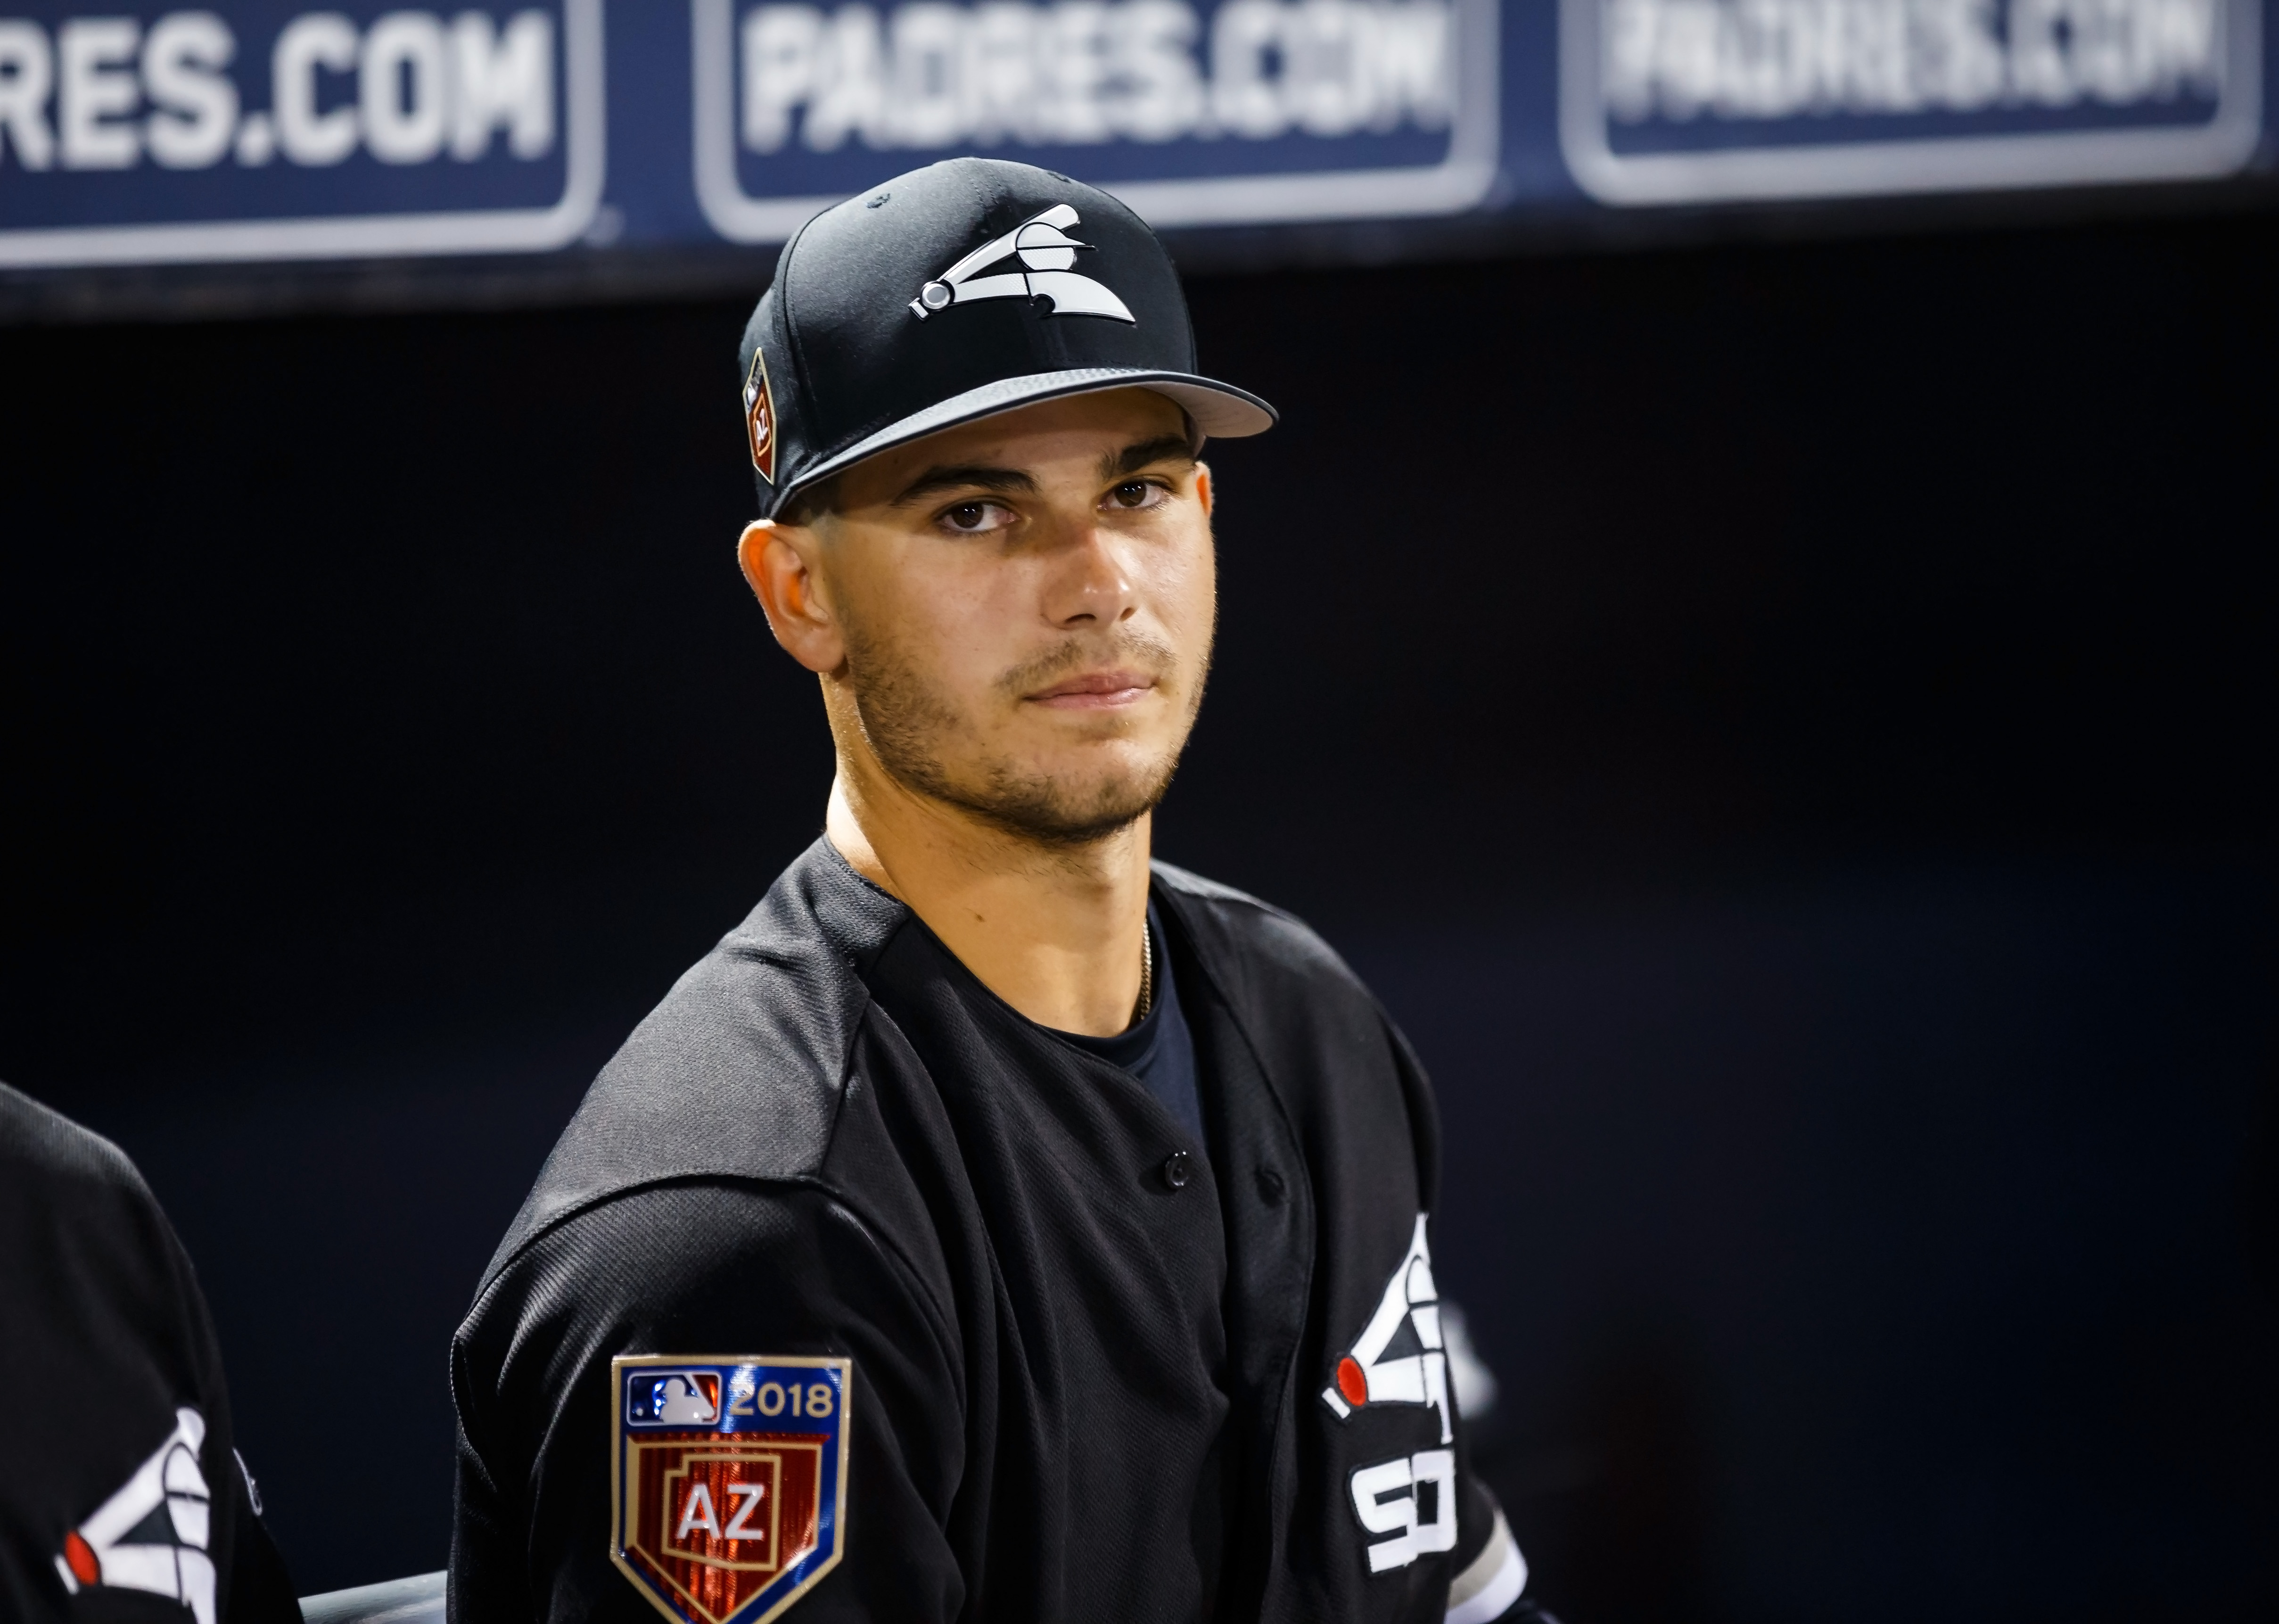 MLB: Spring Training-Chicago White Sox at Seattle Mariners